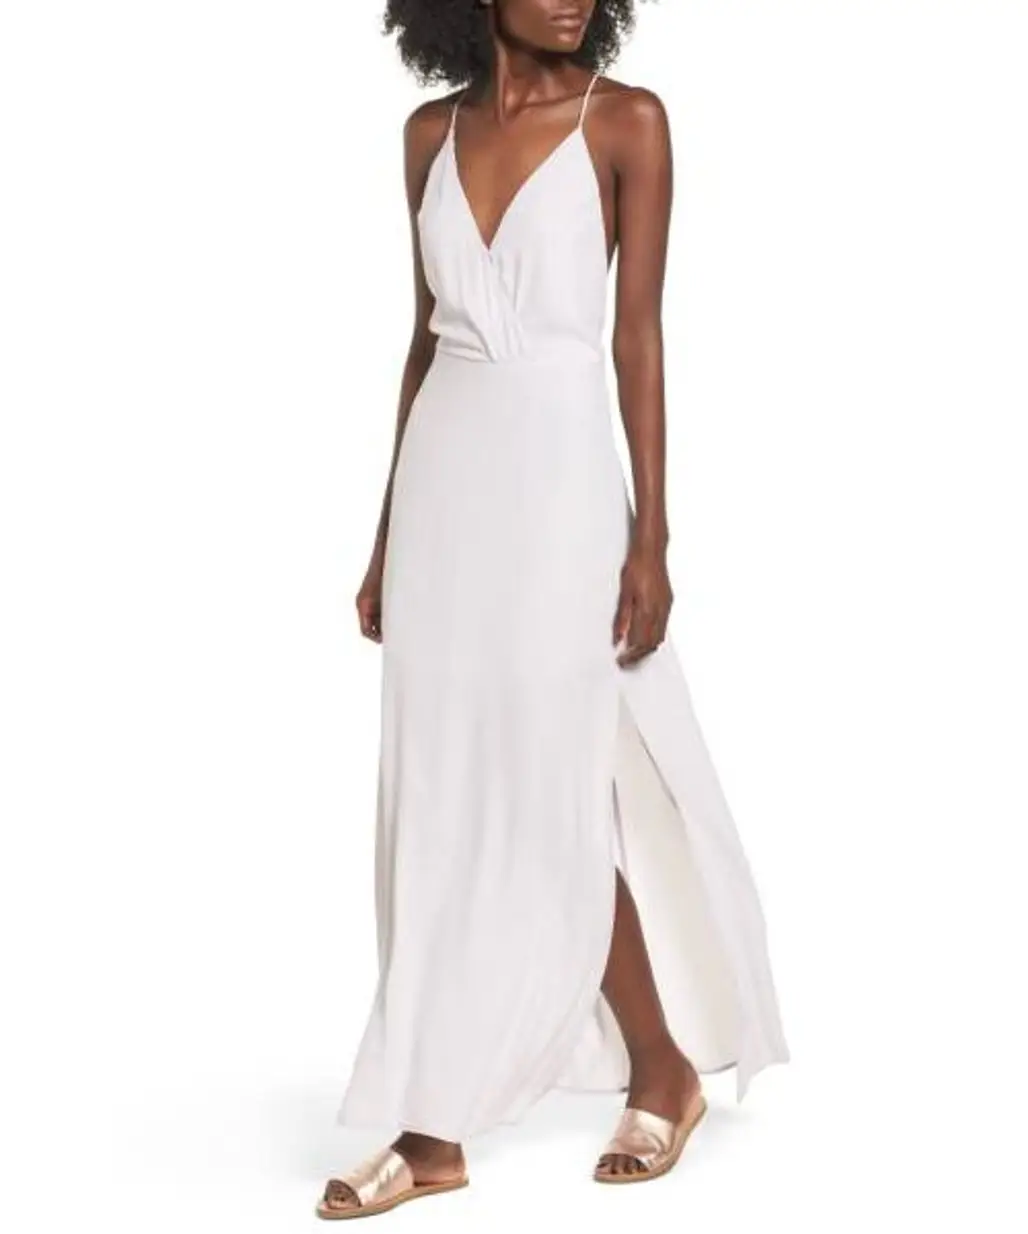 white, dress, day dress, gown, neck,